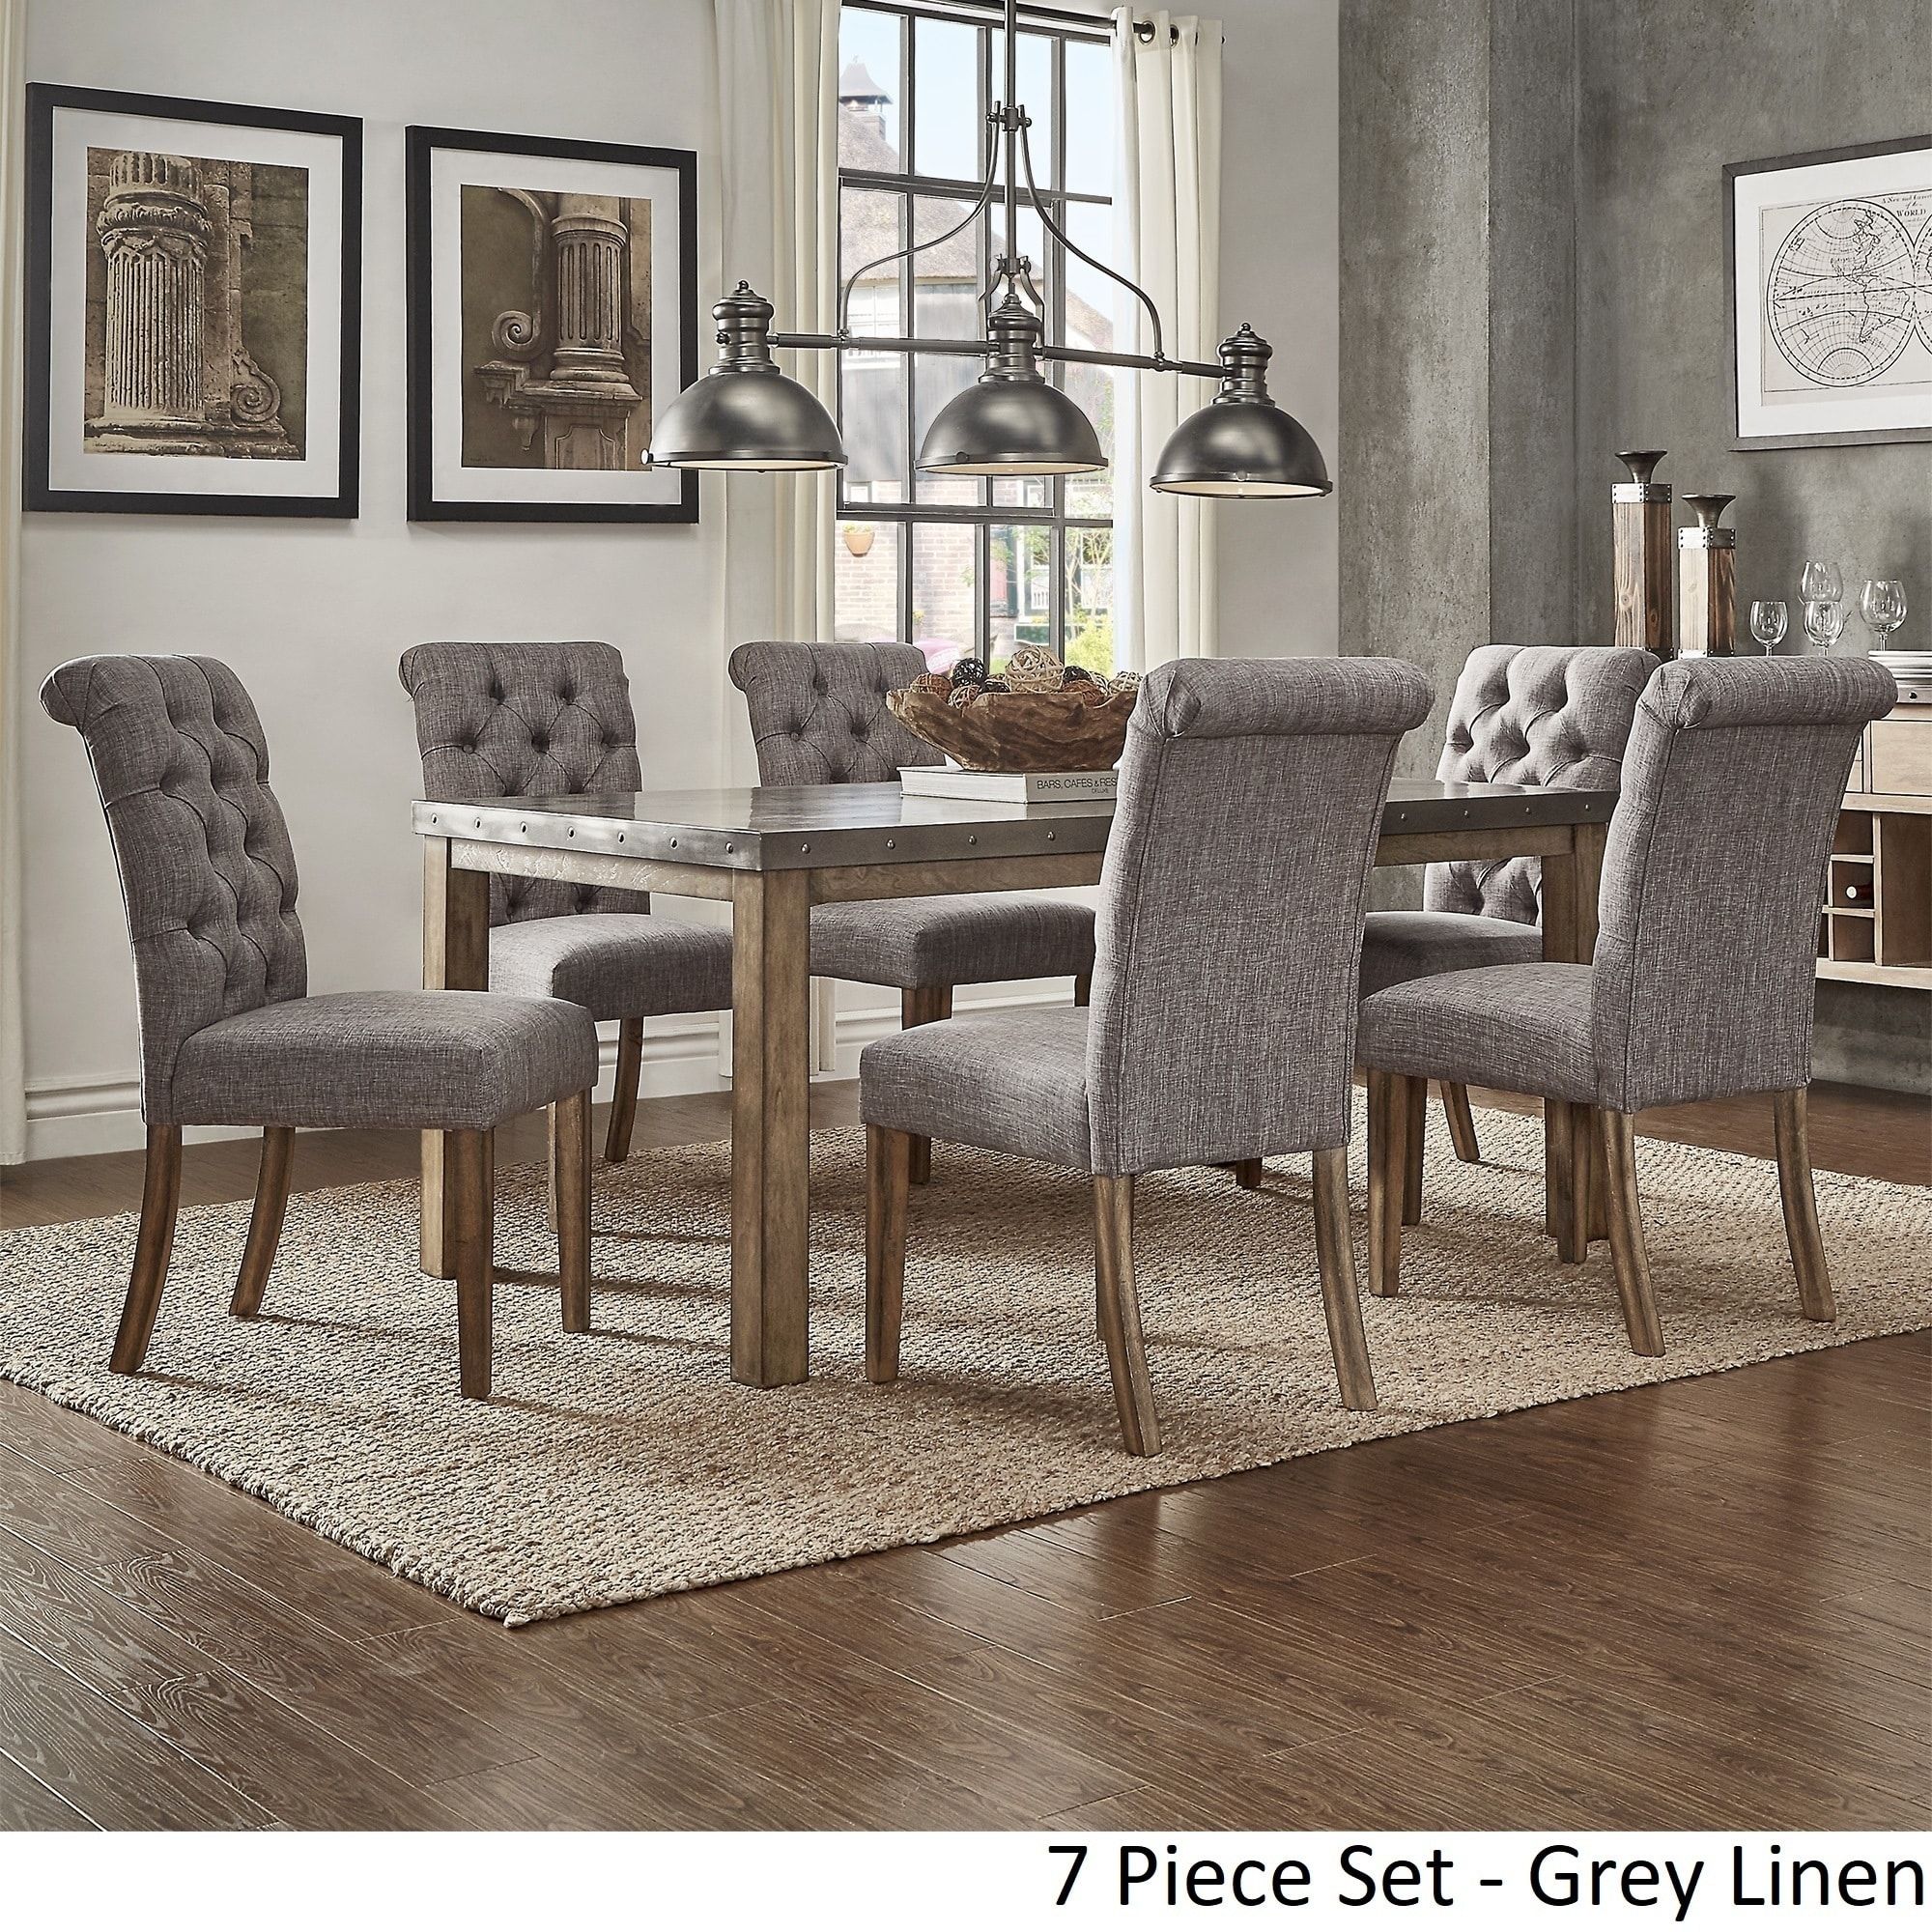 Moriville Counter Height Dining Table Might Be Simple At F Pertaining To Most Recent Partridge 7 Piece Dining Sets (View 13 of 20)